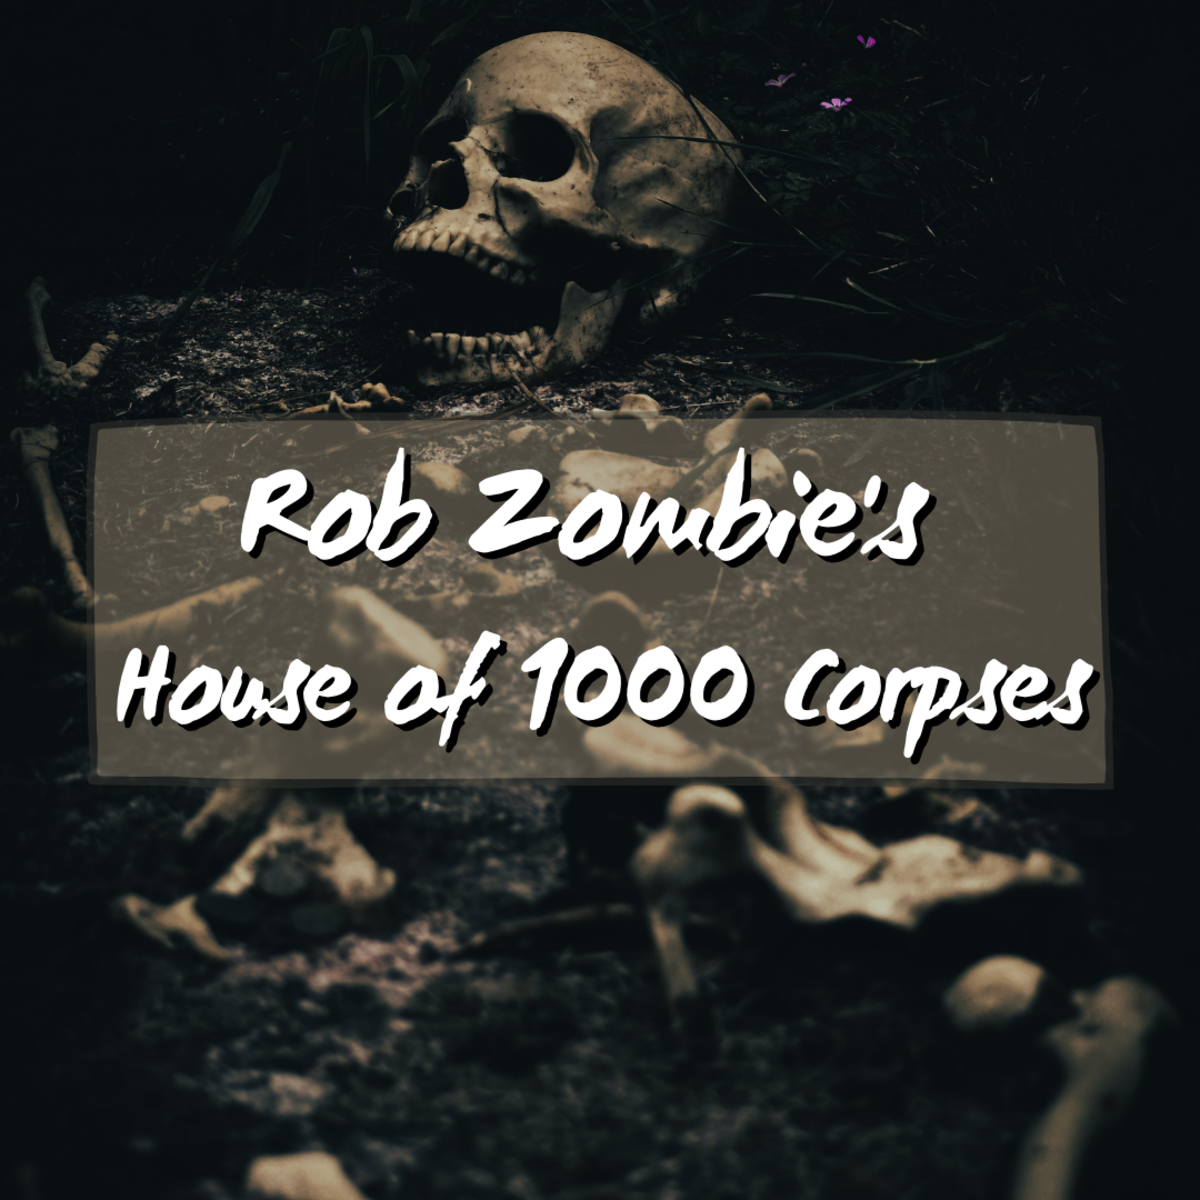 Read on to learn all about Rob Zombie's directorial debut "House of 1000 Corpses." You'll learn the film's basic plot, as well as its pros and cons.